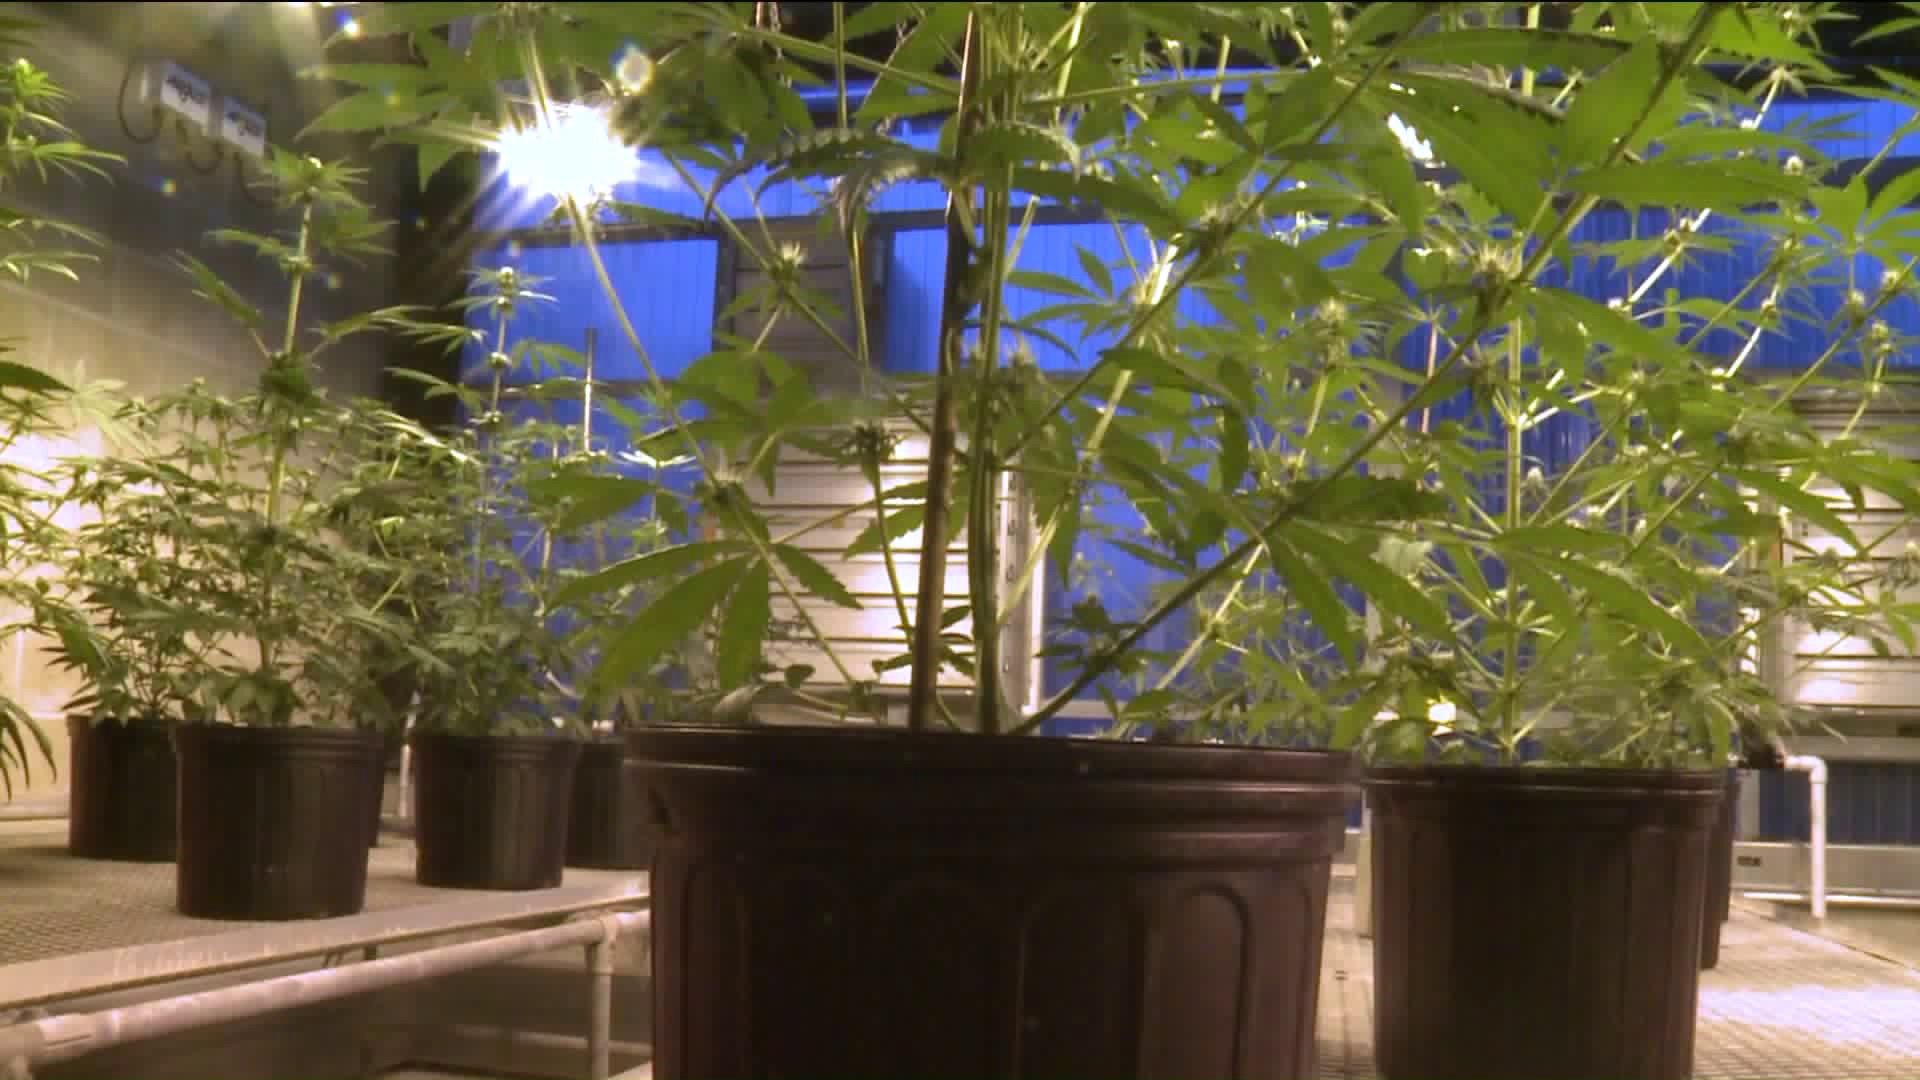 Advocates say CT legislature must act now to get in on hemp-growing business